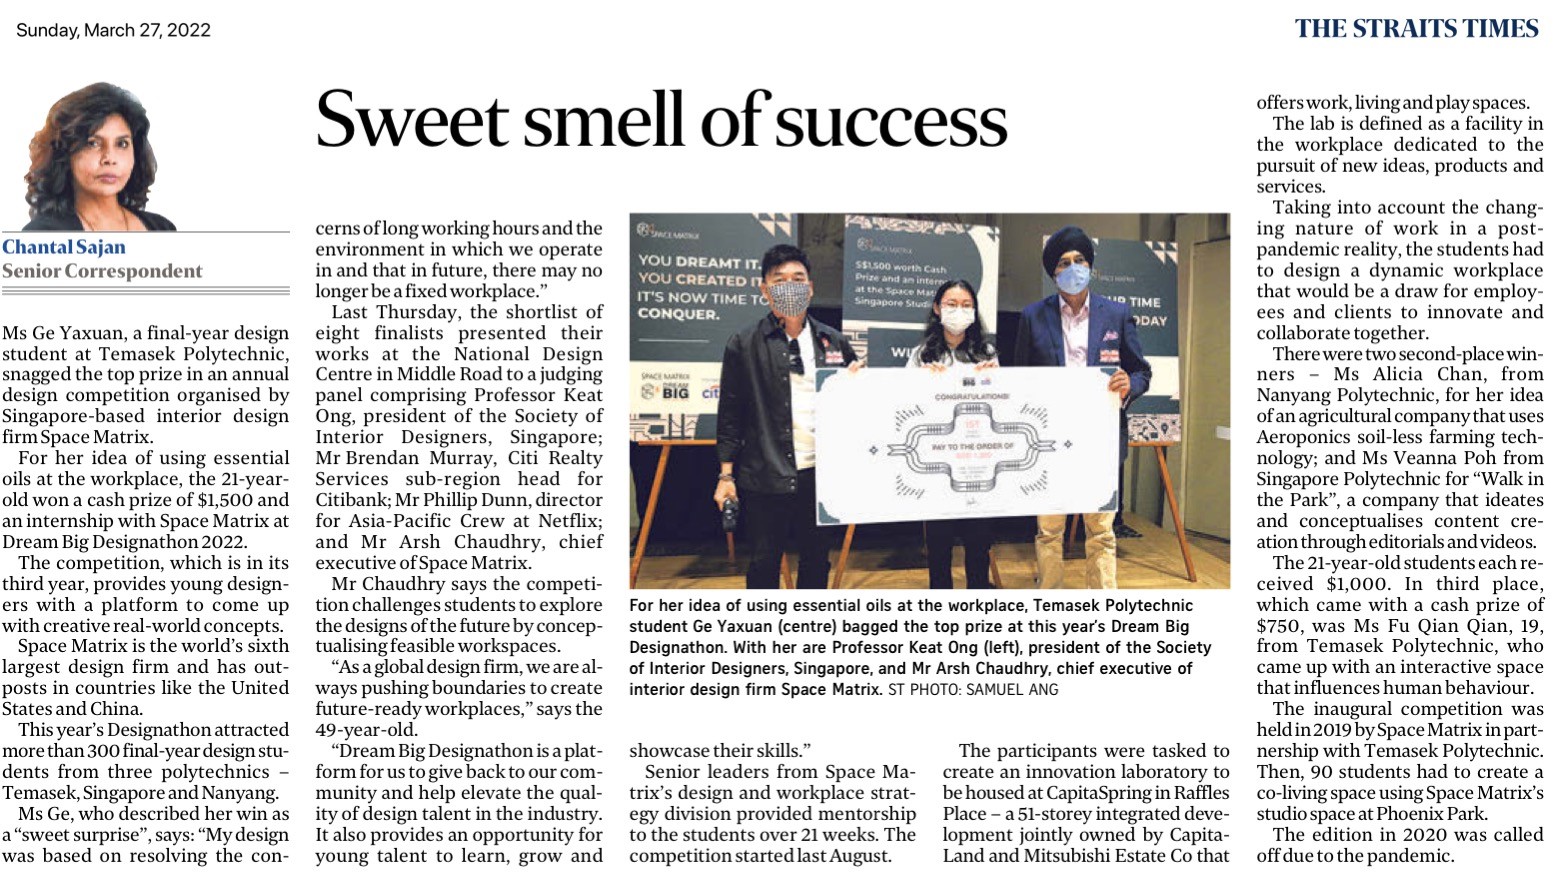 Sweet smell of success, ST 27 March